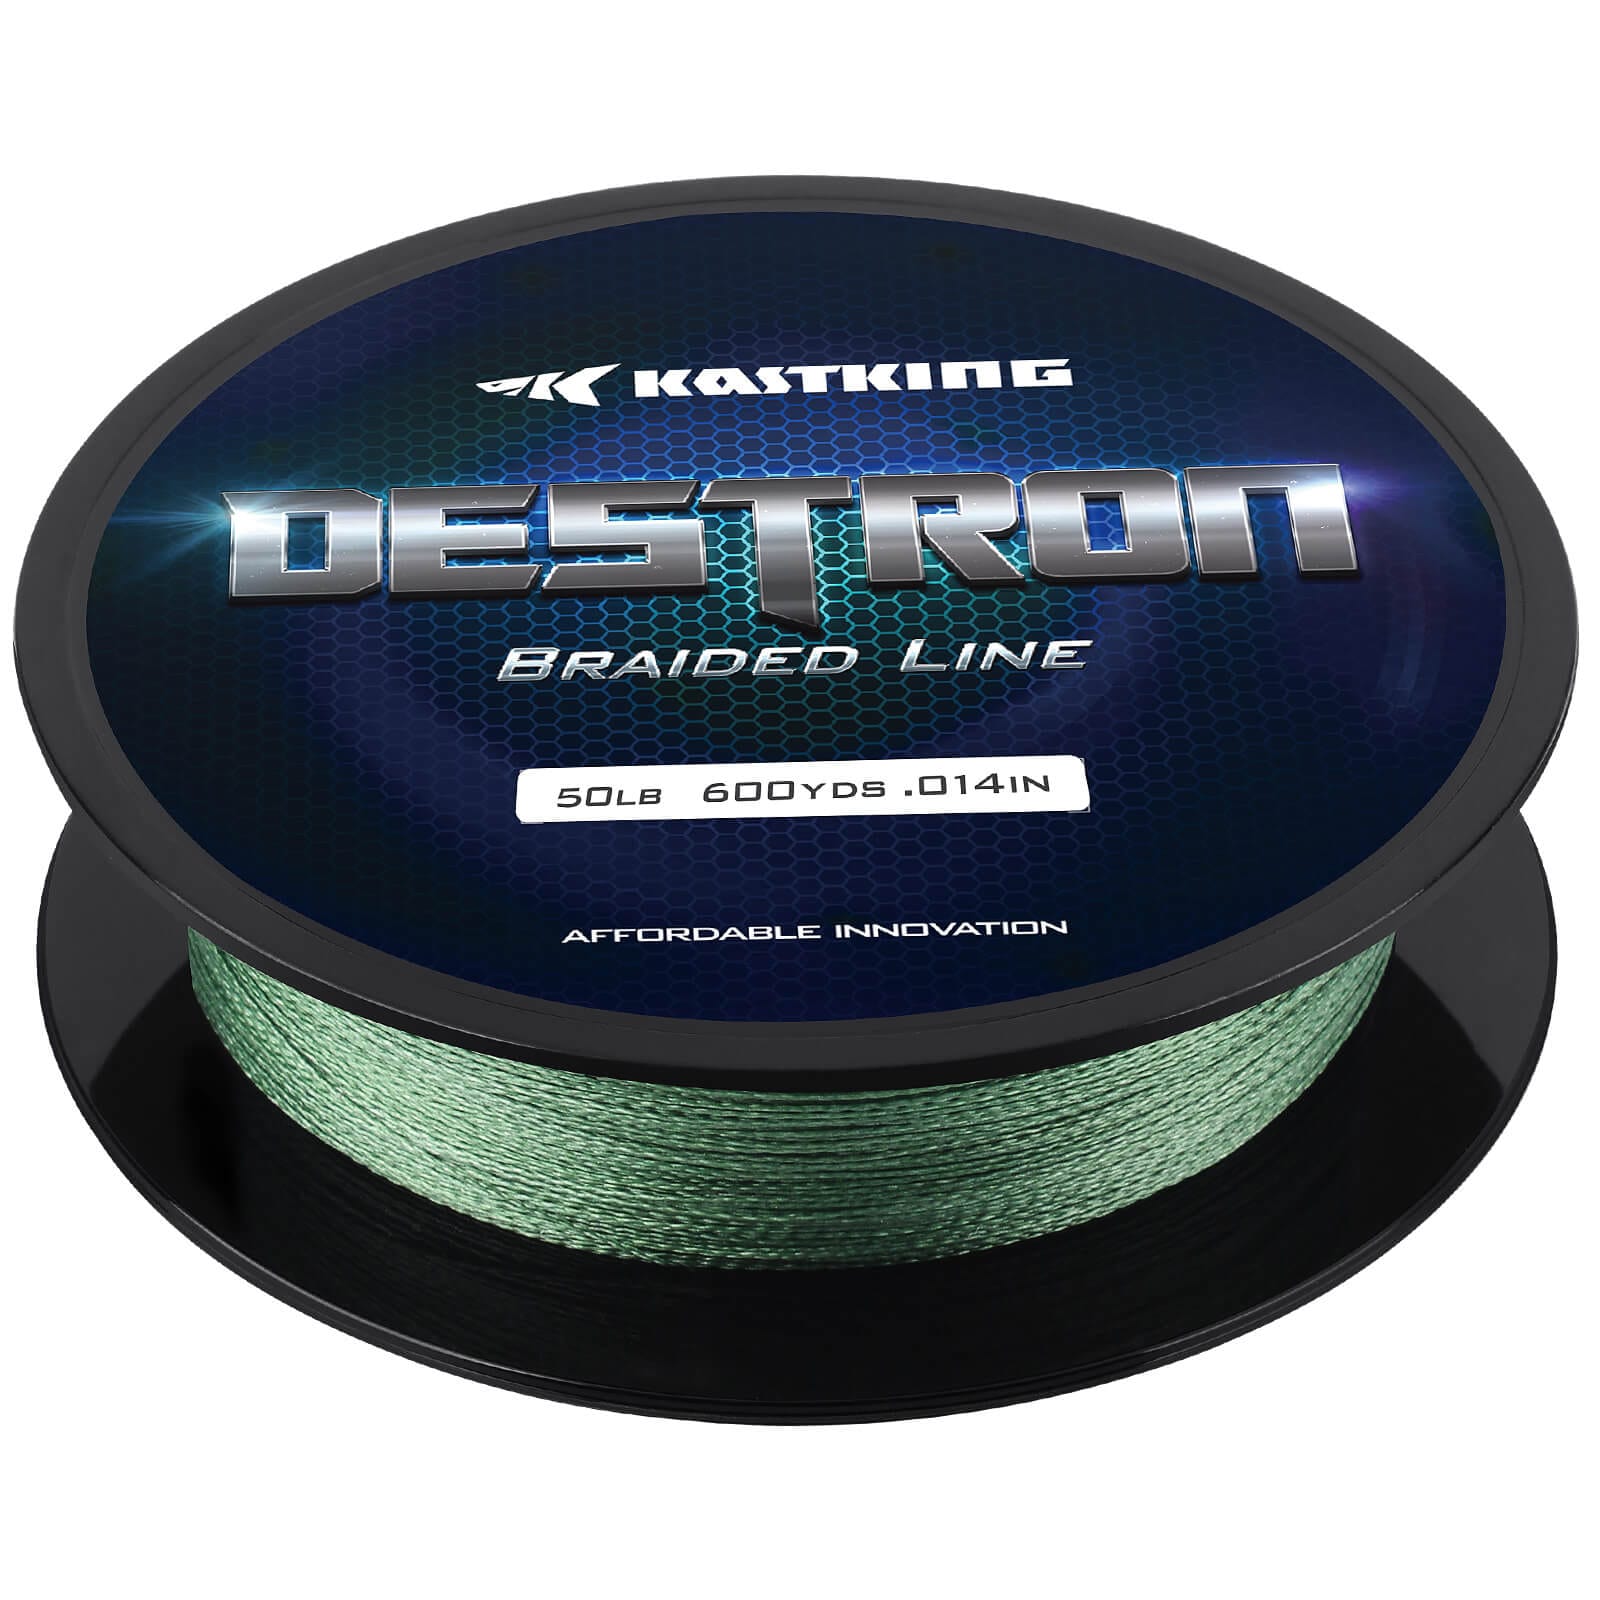 Lunker Braided Line - Thinner, Stronger, 300/547 Yards, 6-80LBs